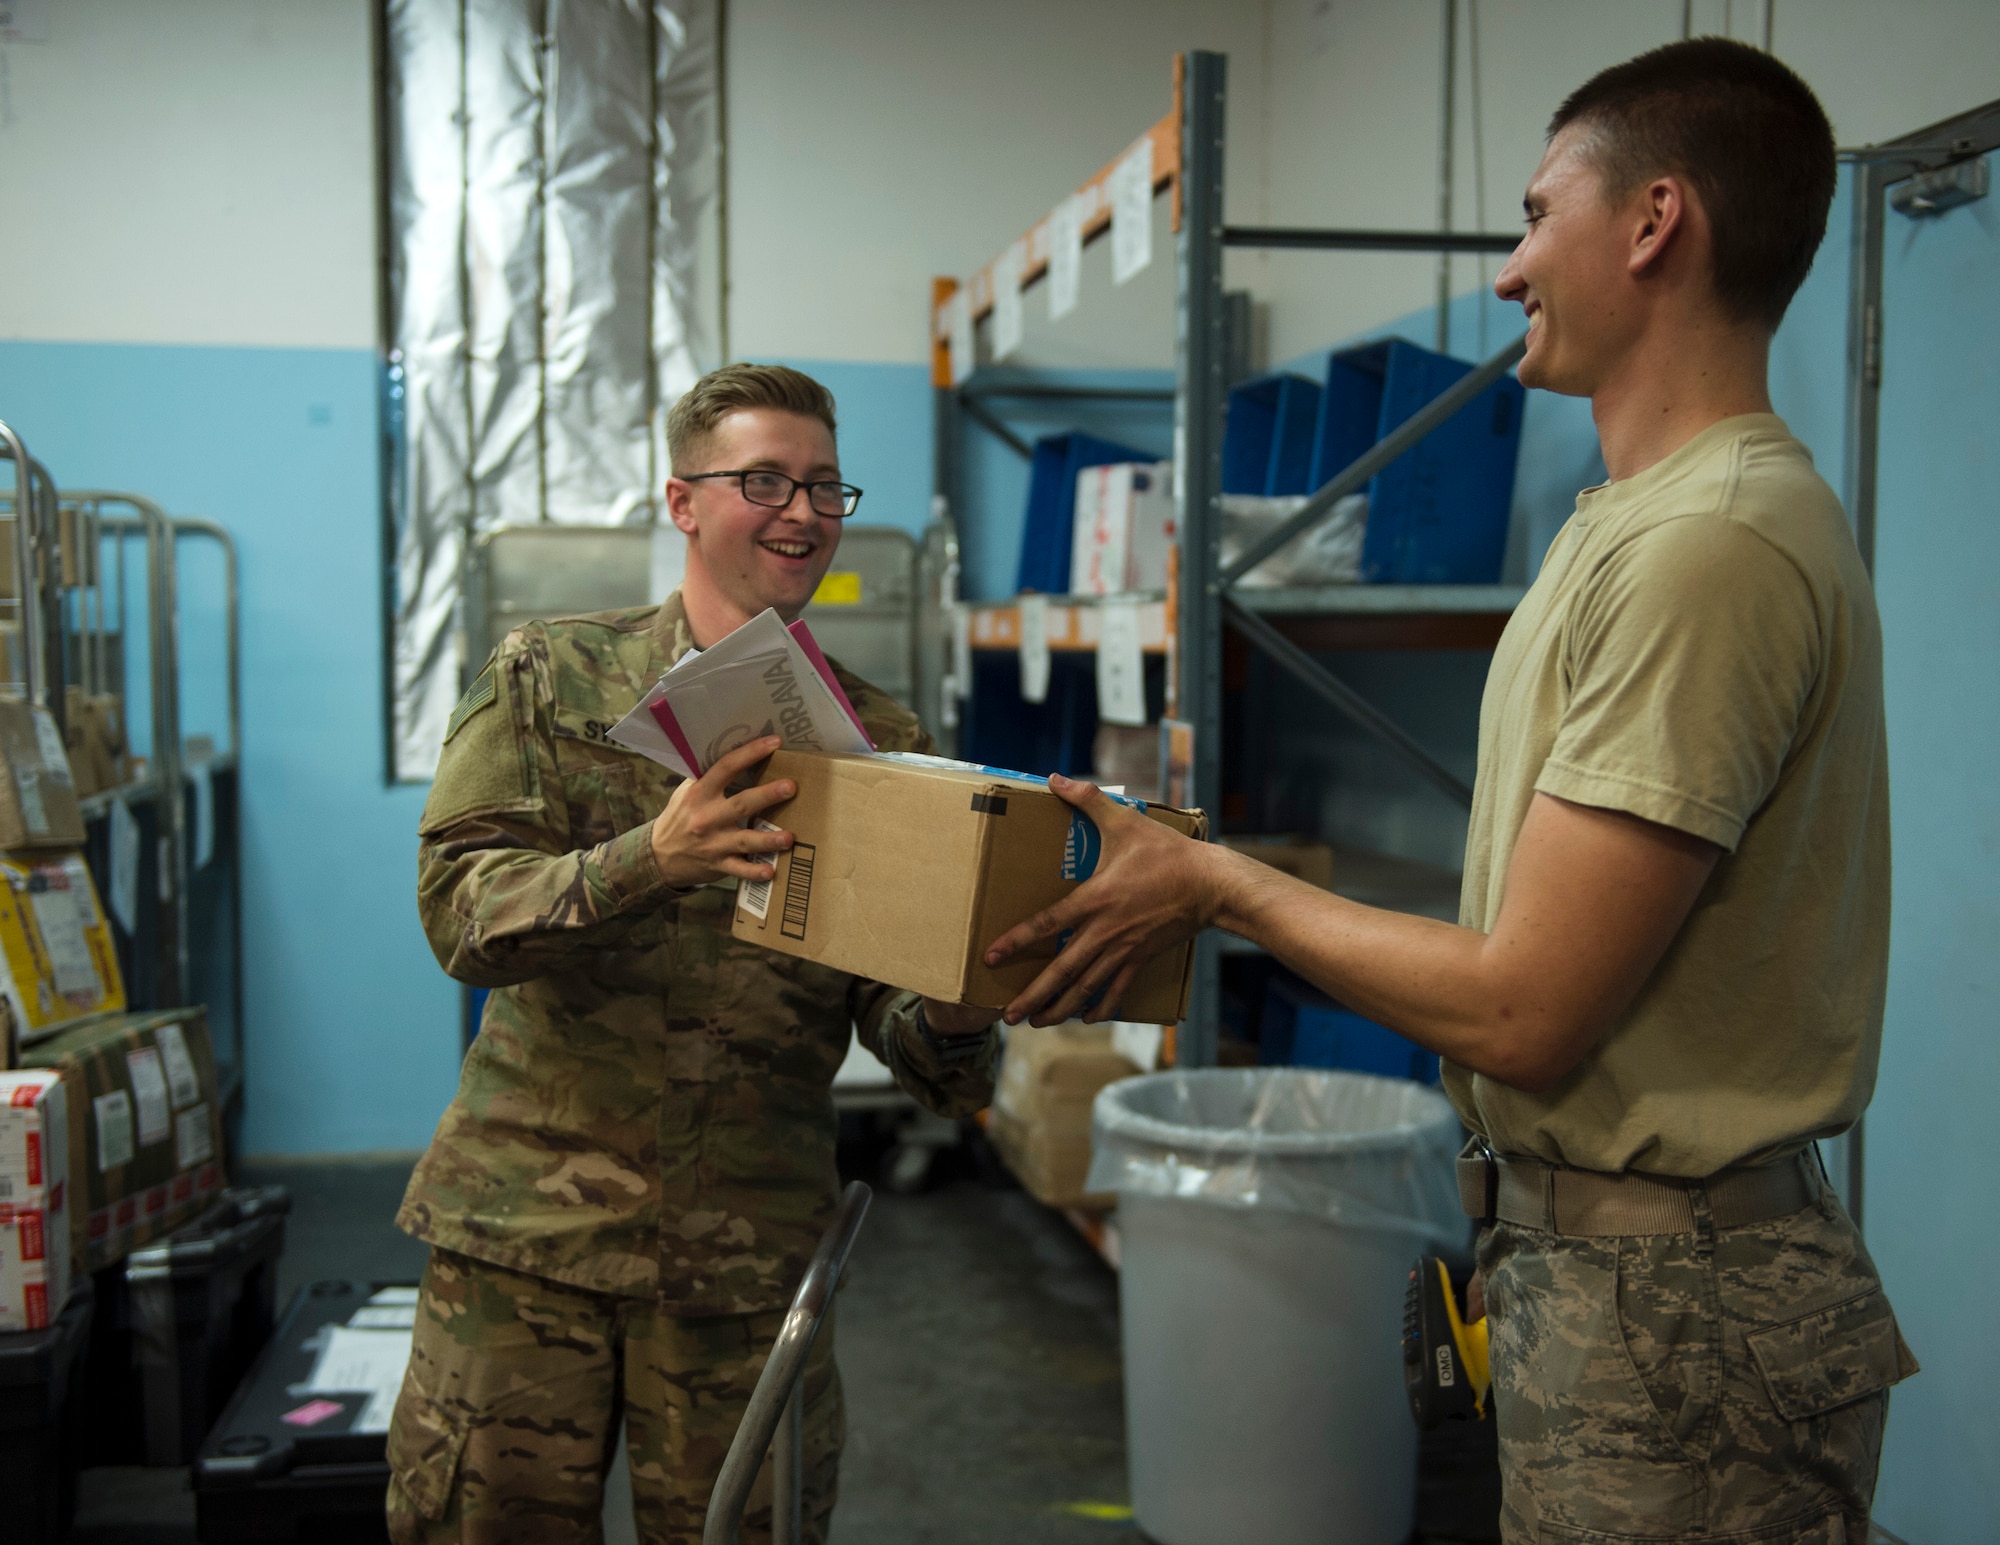 U.S. Air Force Airman 1st Class Kevin Otero, right, a military postal clerk with the 379th Expeditionary Communication Squadron, hands off a care package to a customer at Al Udeid Air Base, Qatar, July 14, 2017.